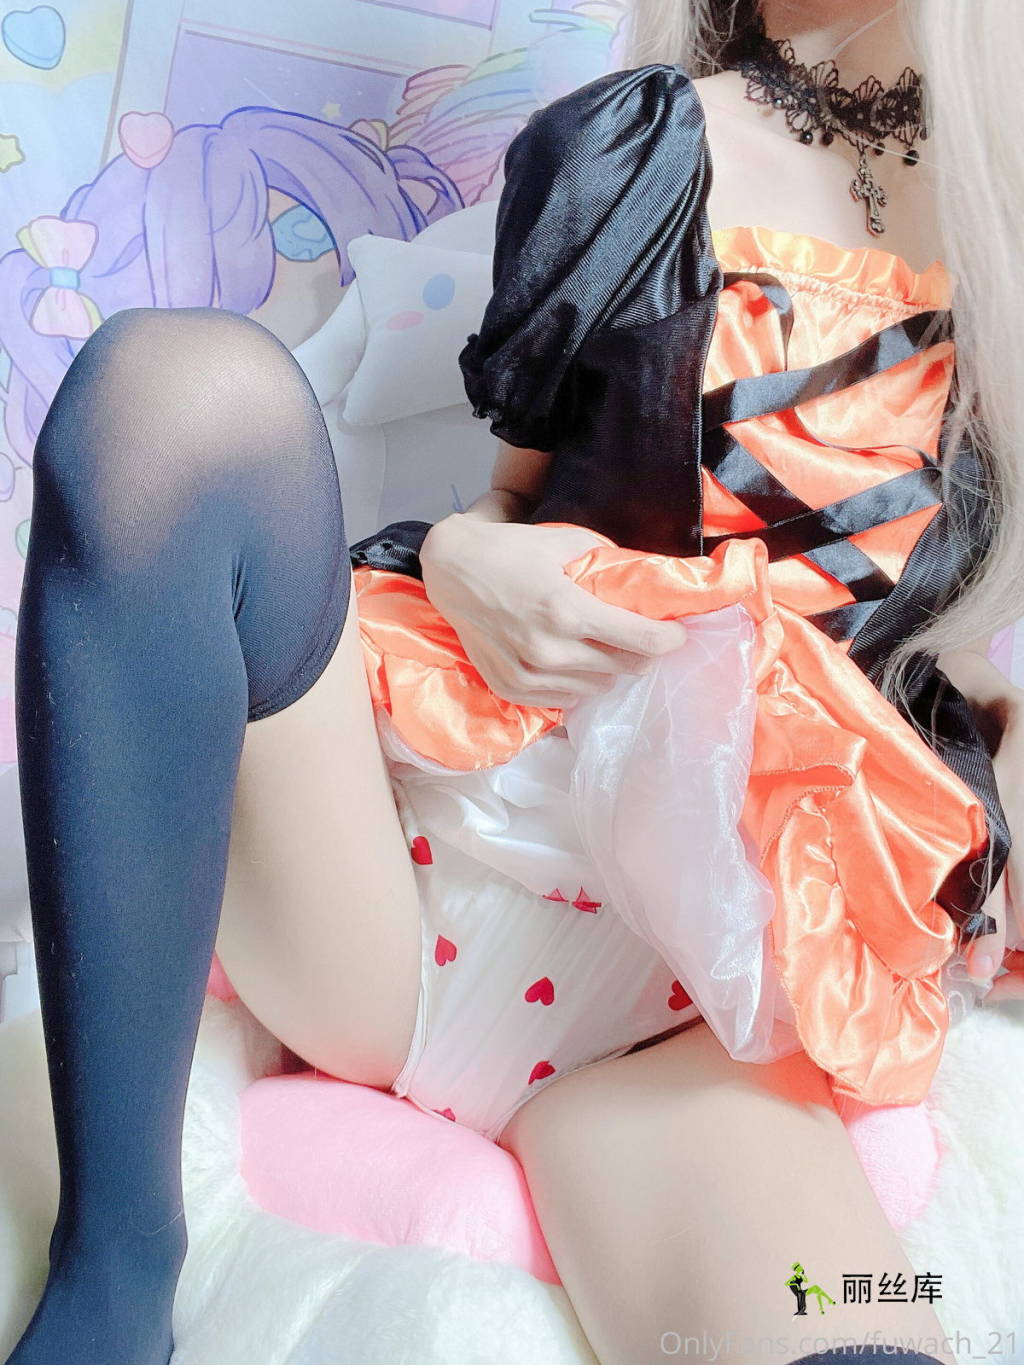 Onlyfans fuwa  ͼϼ part9_˿